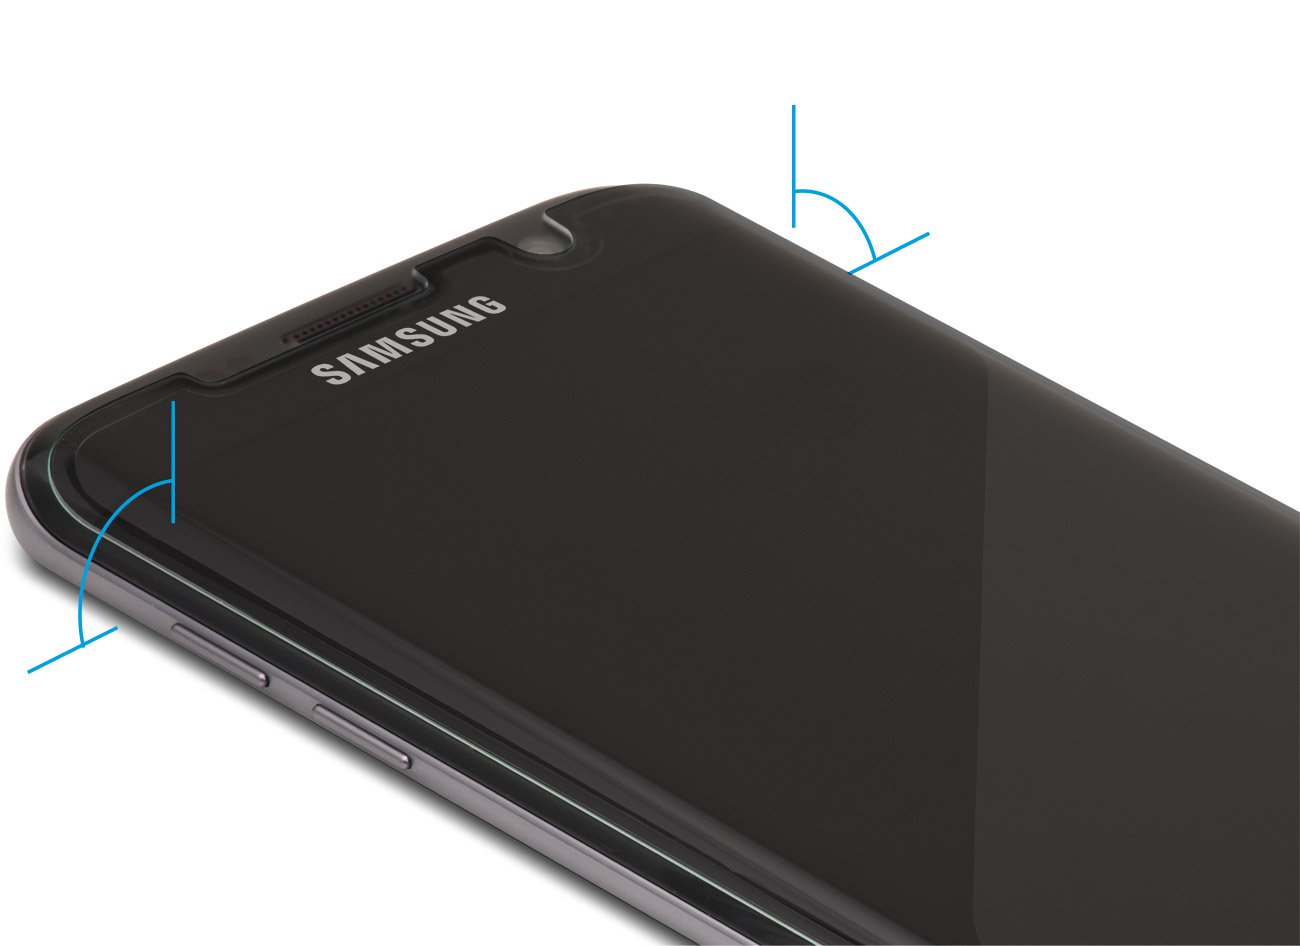 Curved glass edge-to-edge screen protector